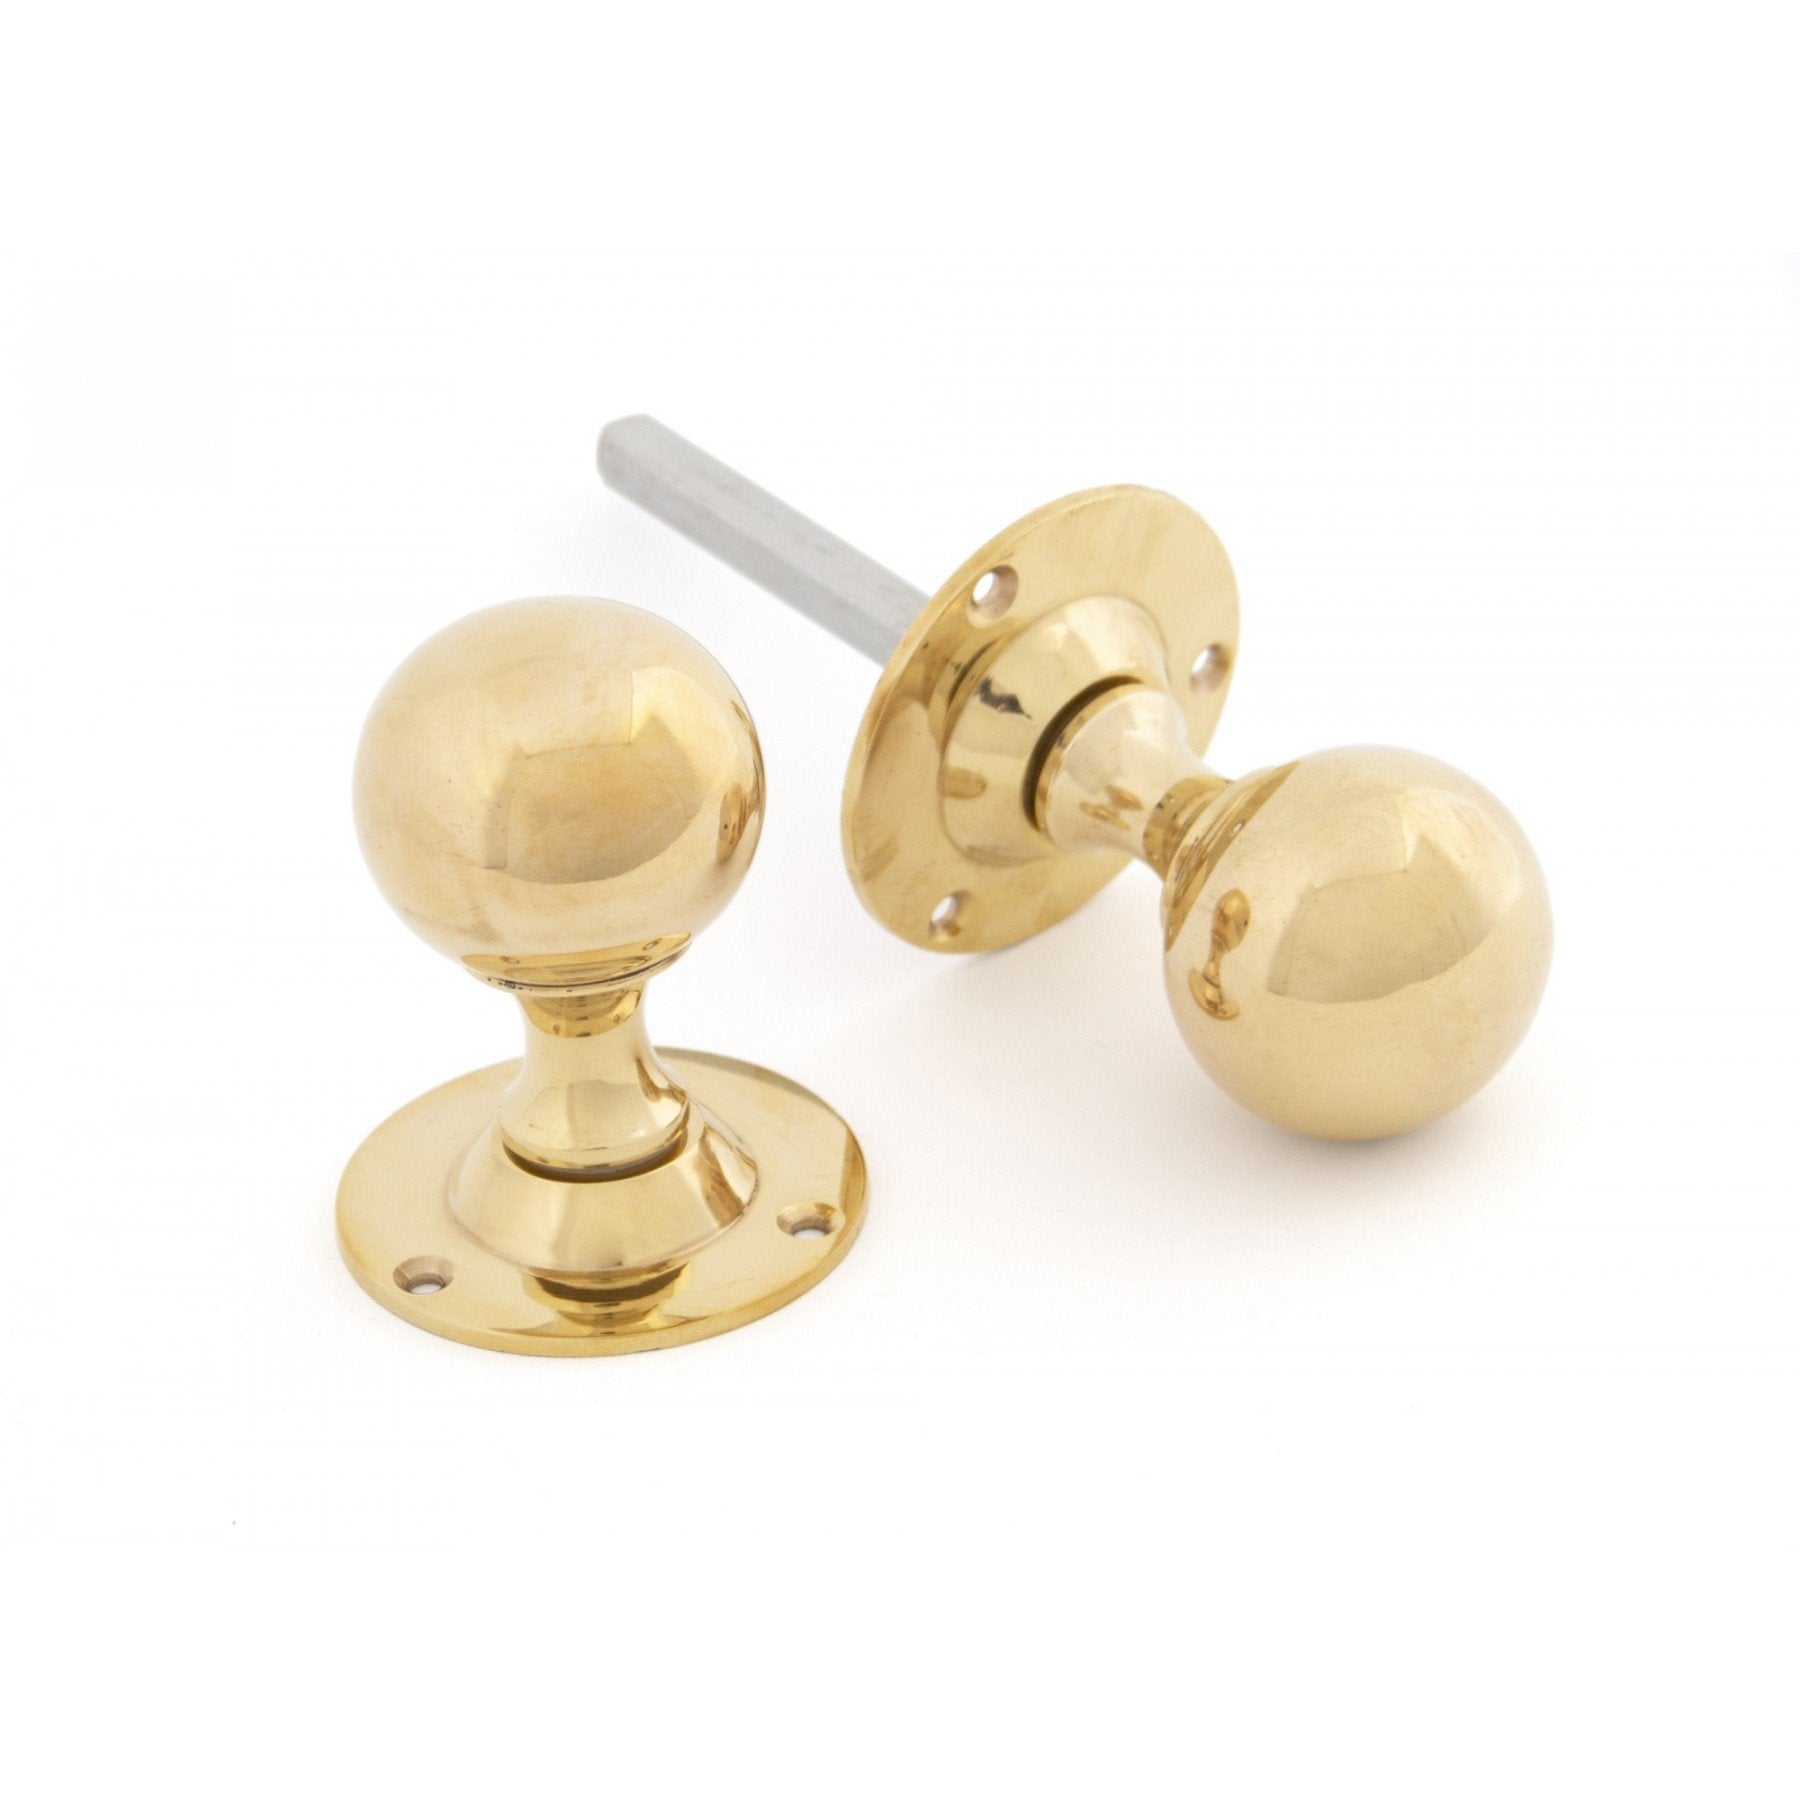 From the Anvil Polished Brass Ball Mortice Knob Set